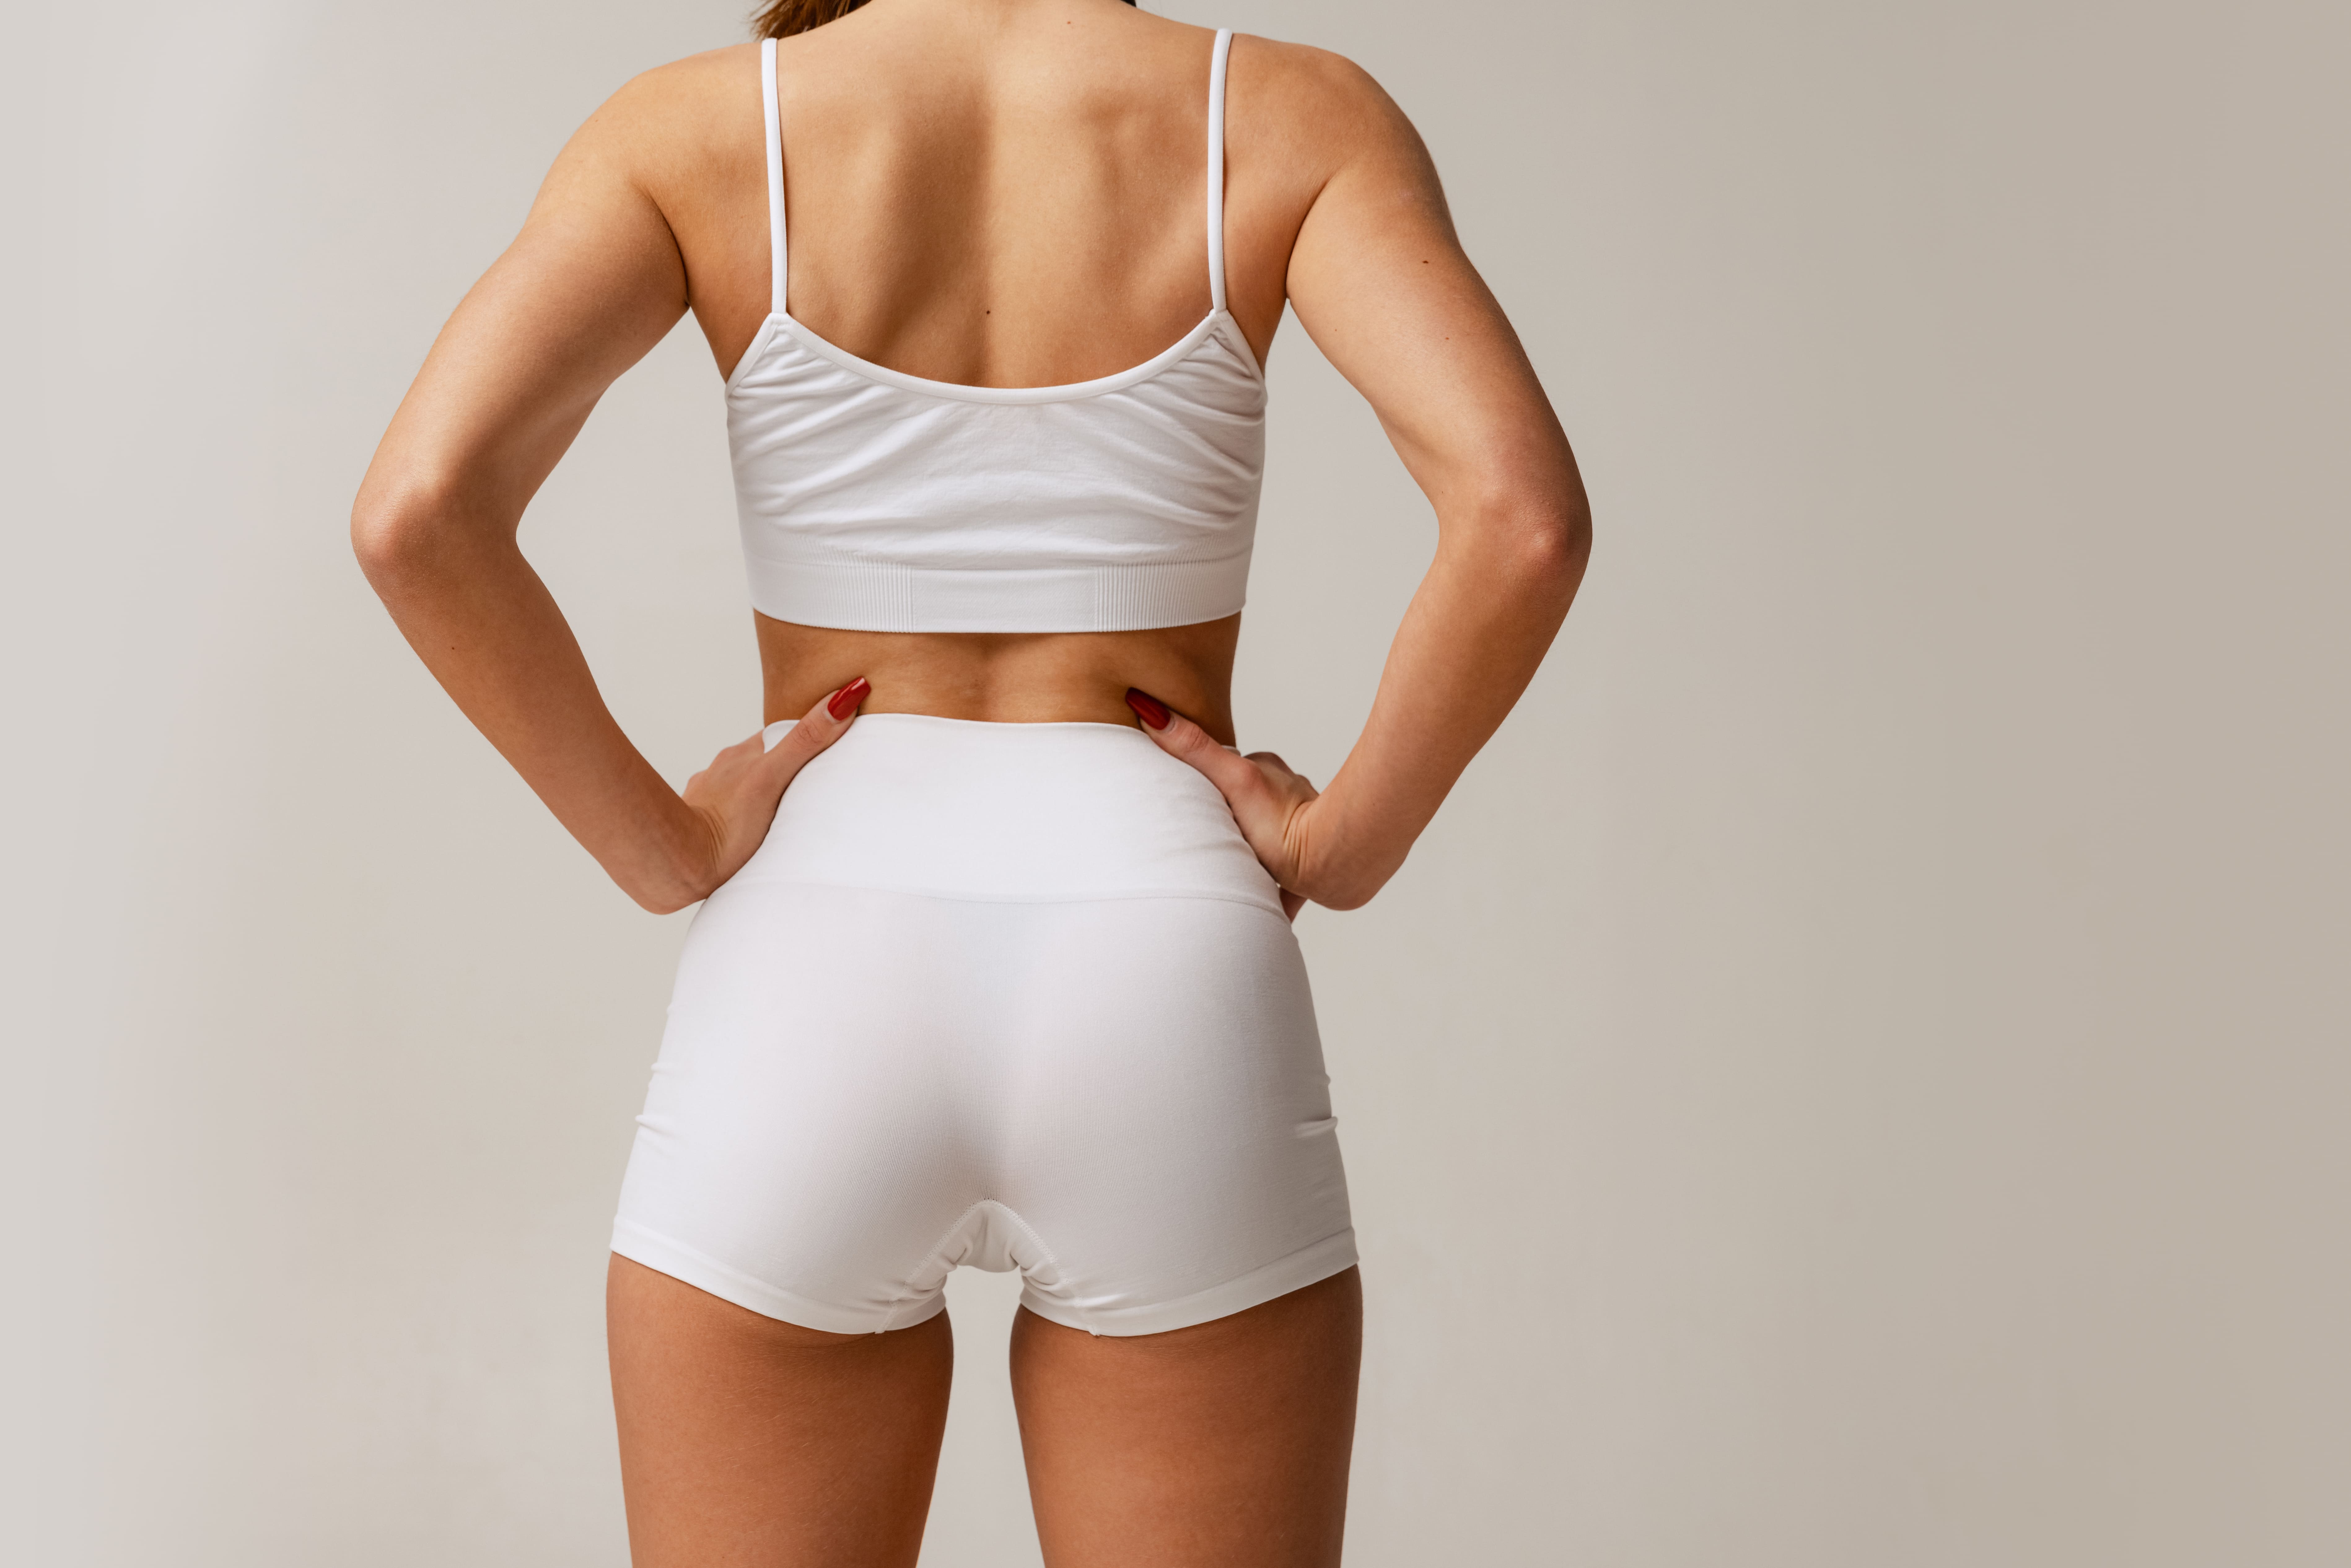 Female Booty White Image & Photo (Free Trial)